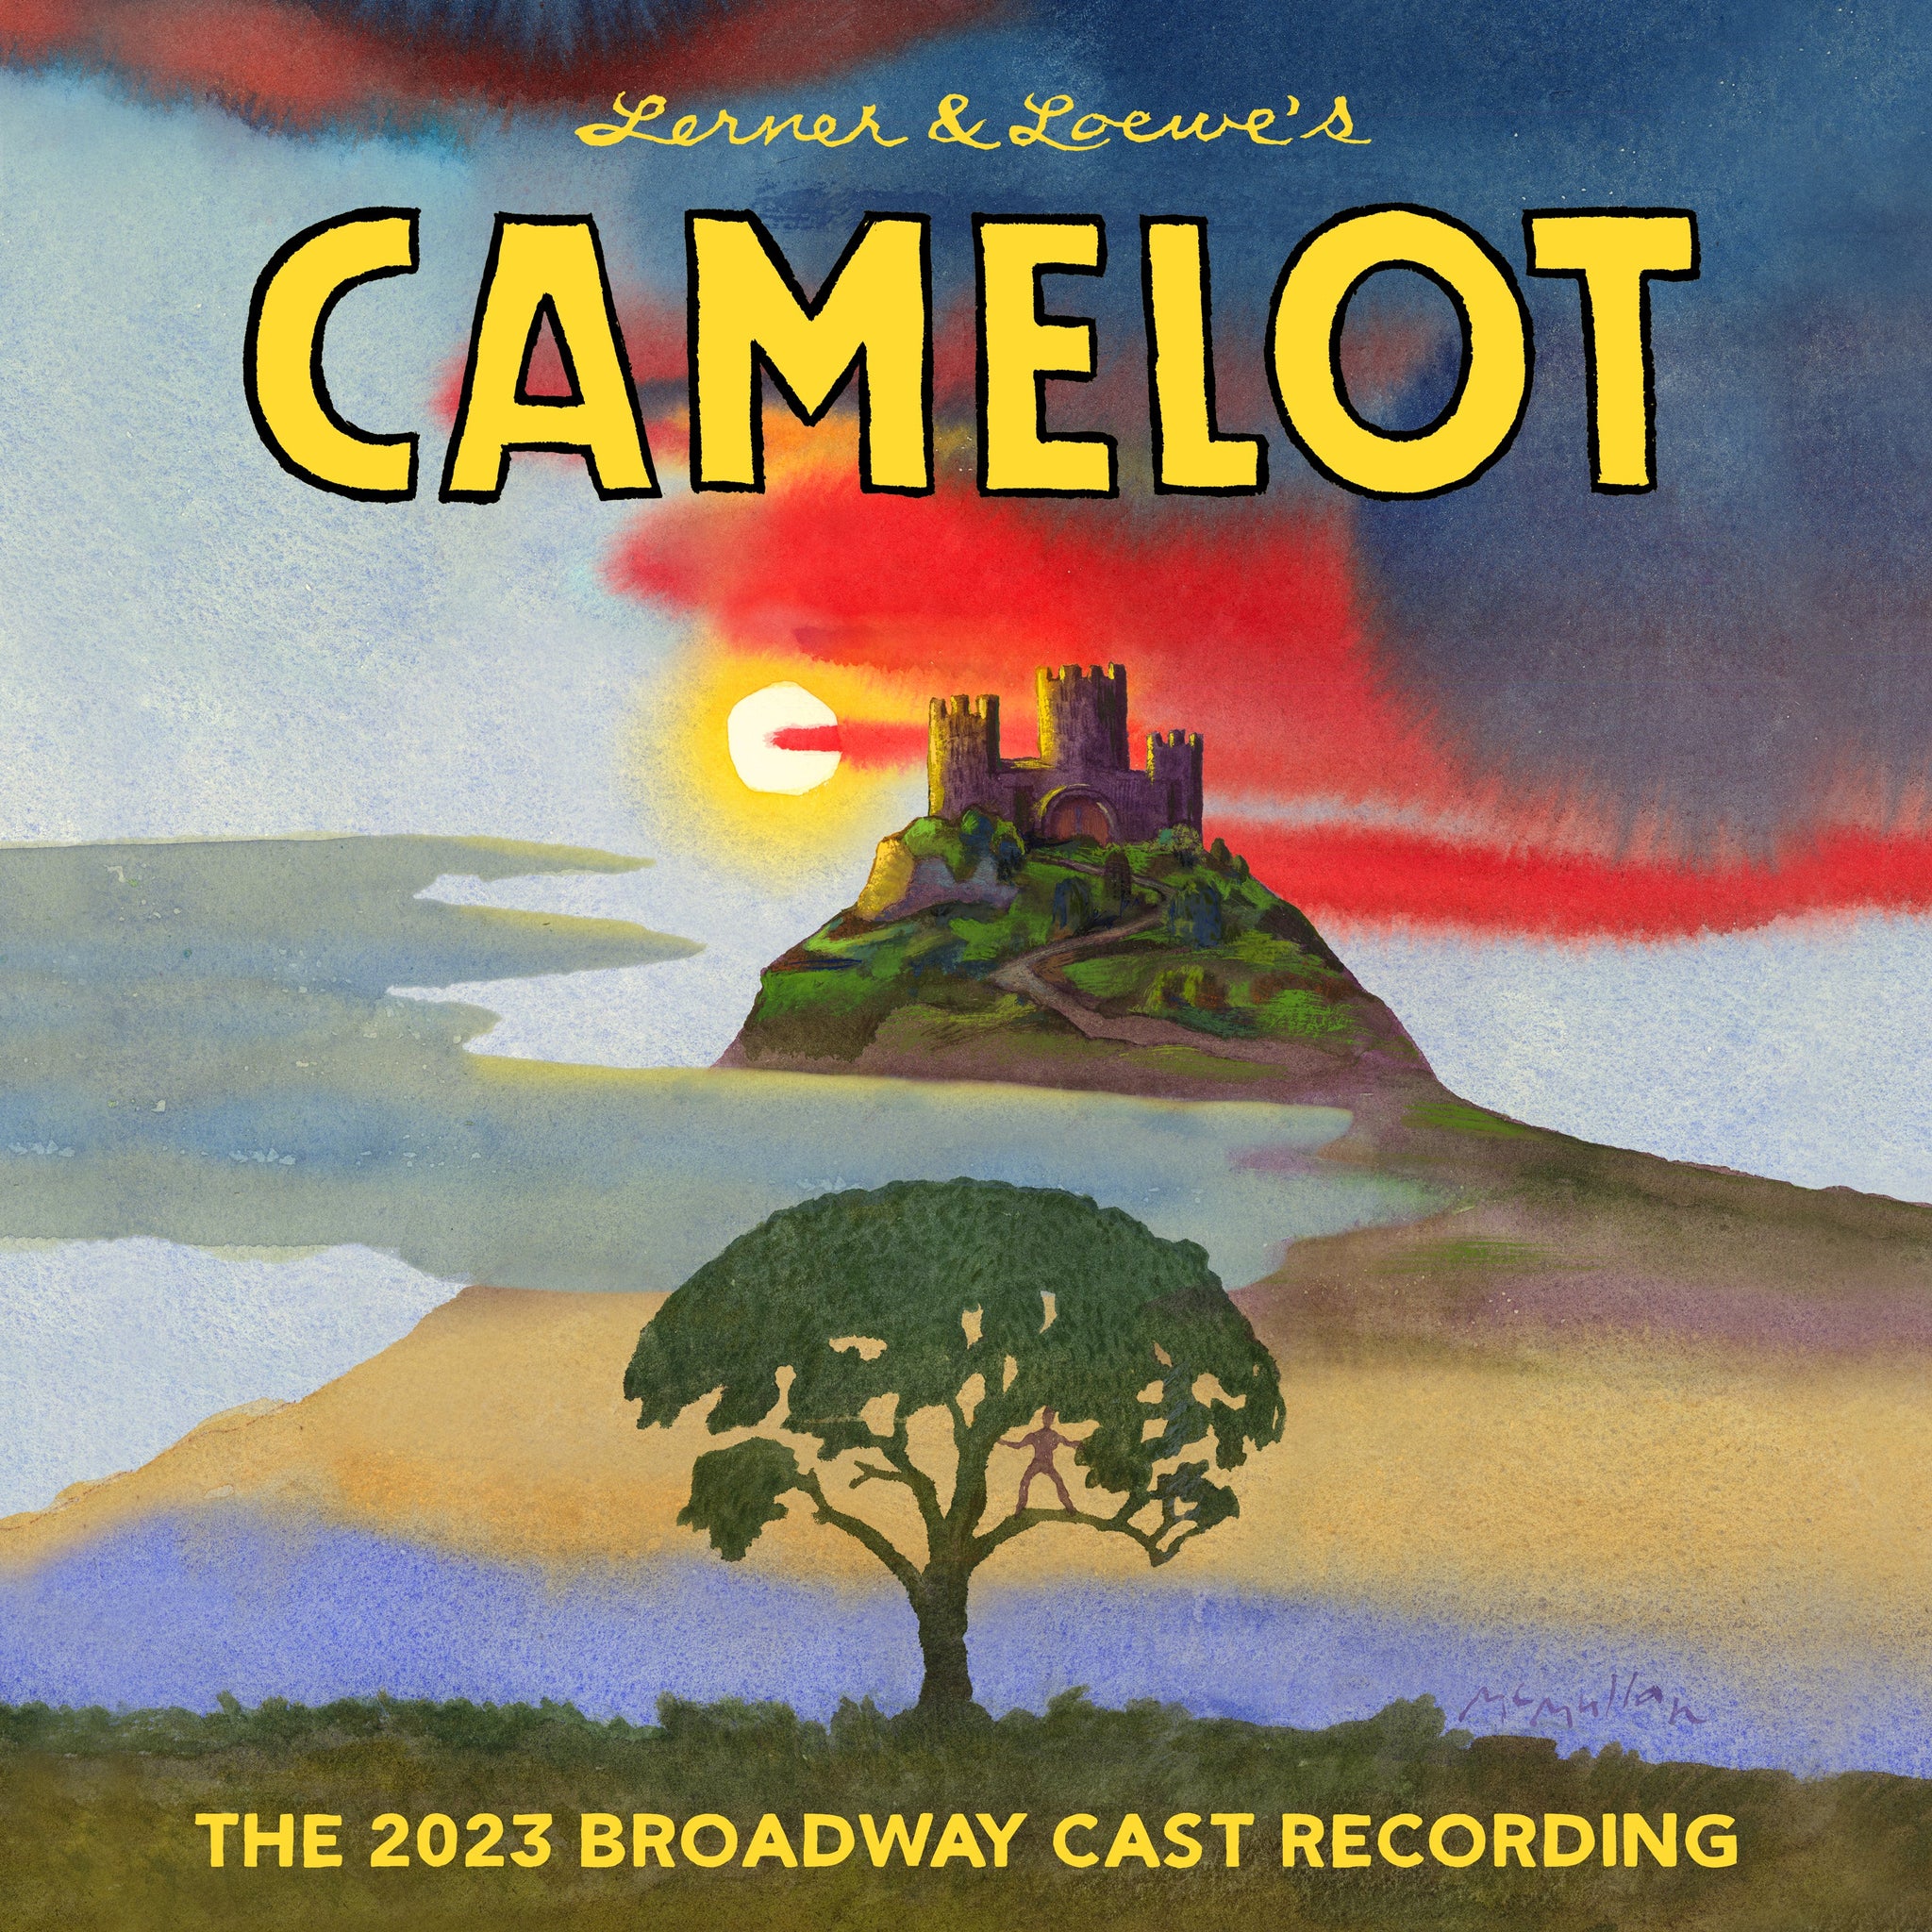 Camelot (The 2023 Broadway Cast Recording) [MP3]